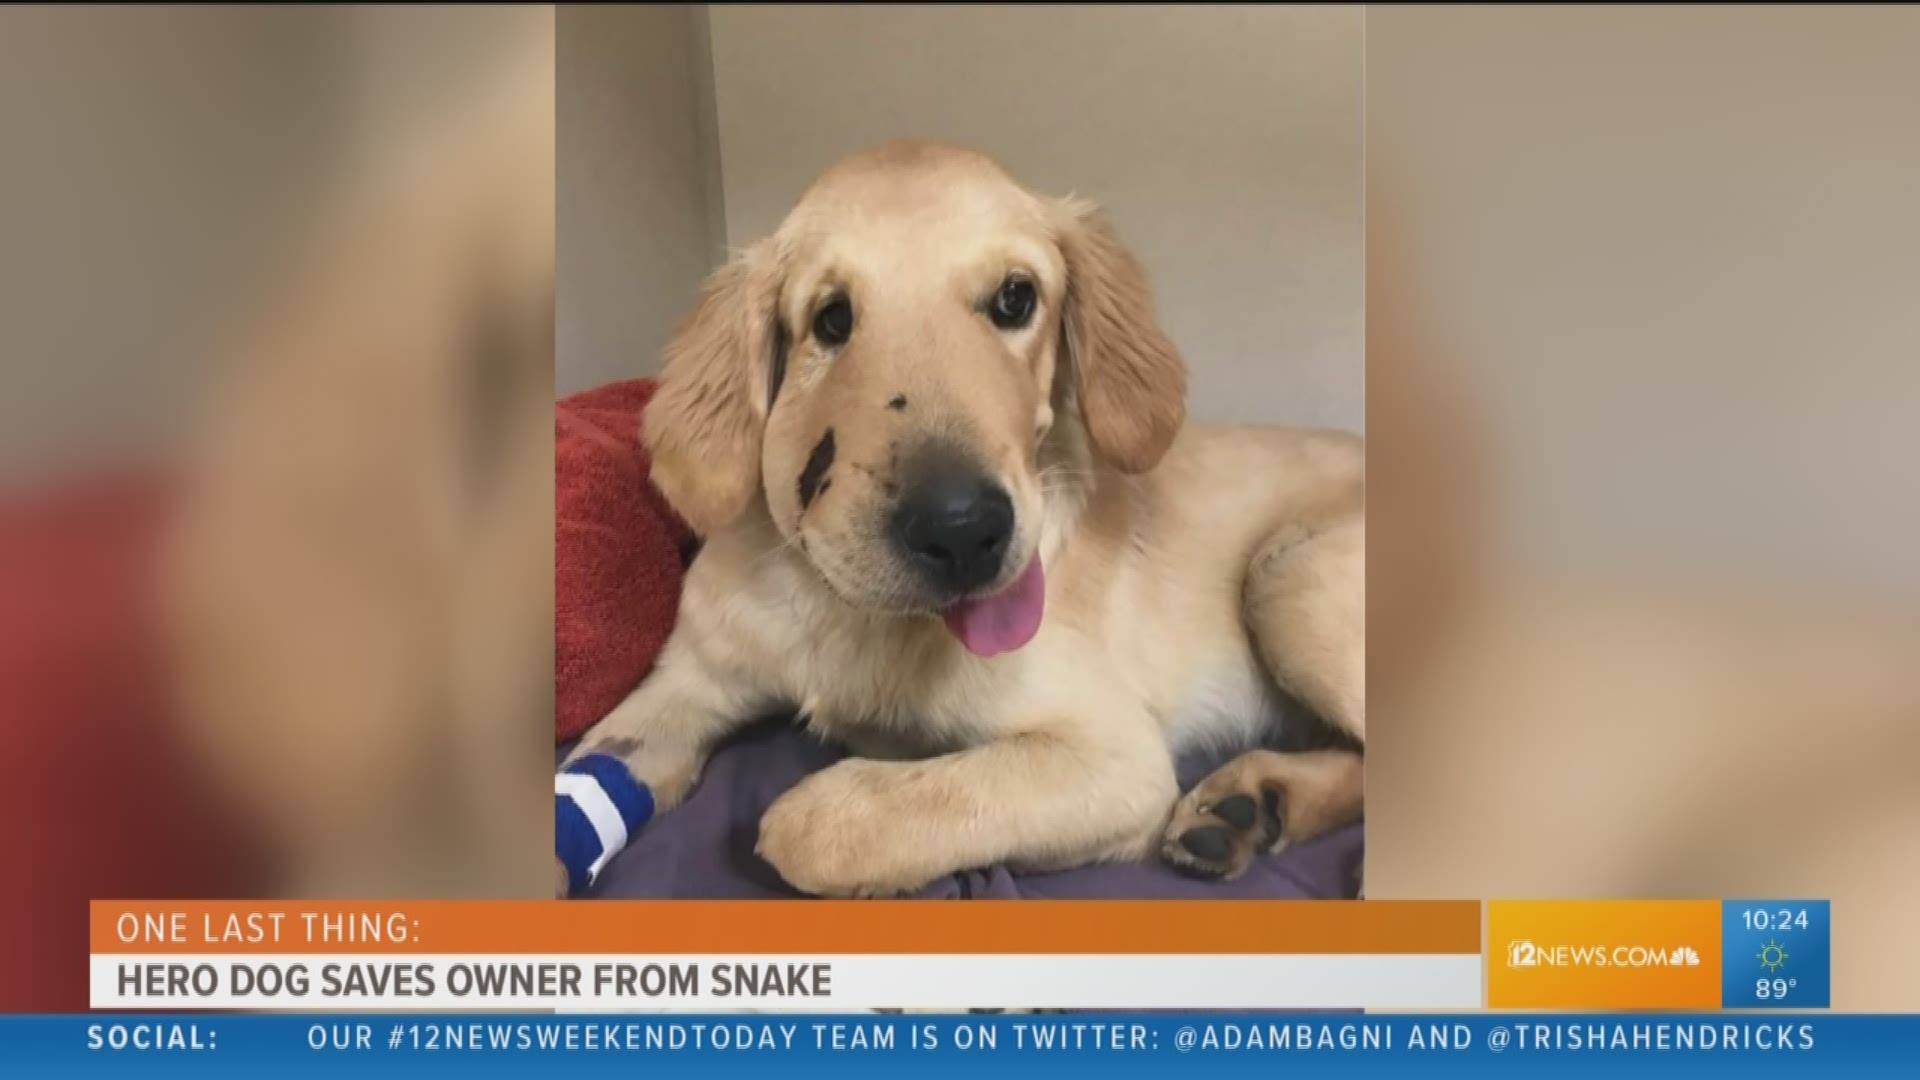 While walking down a hill, Paula Godwin said she nearly stepped on a rattlesnake. But, she said, her "hero of a puppy" saved her.